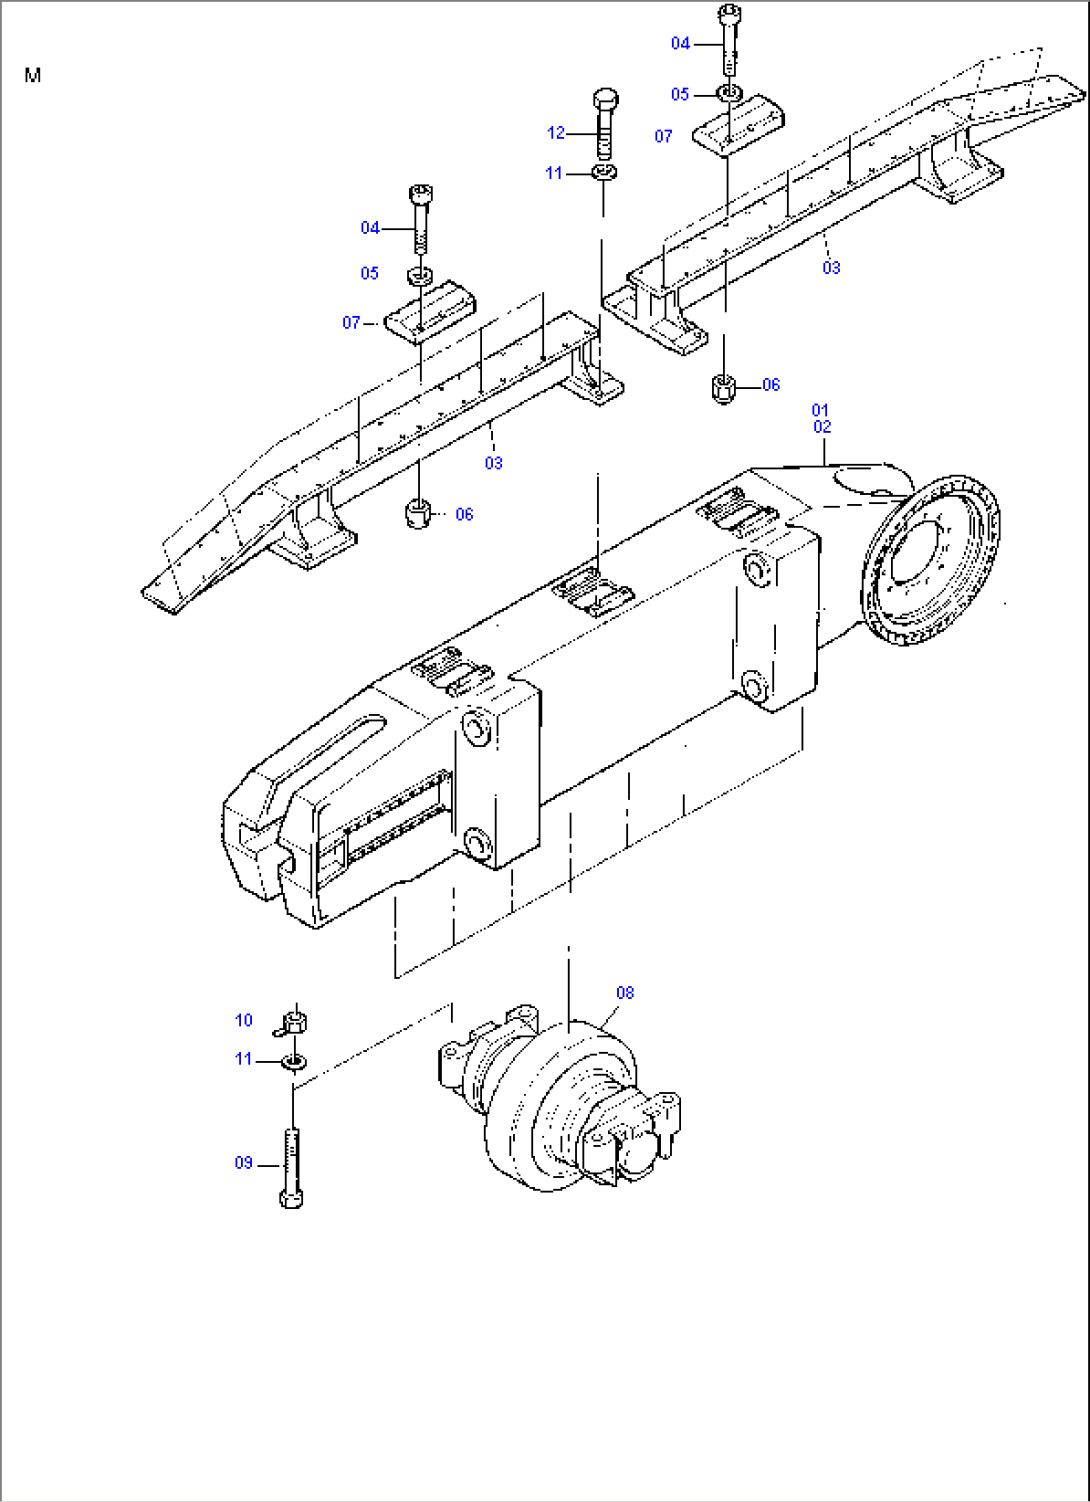 Track Frame, Bottom Roller and Rail Support